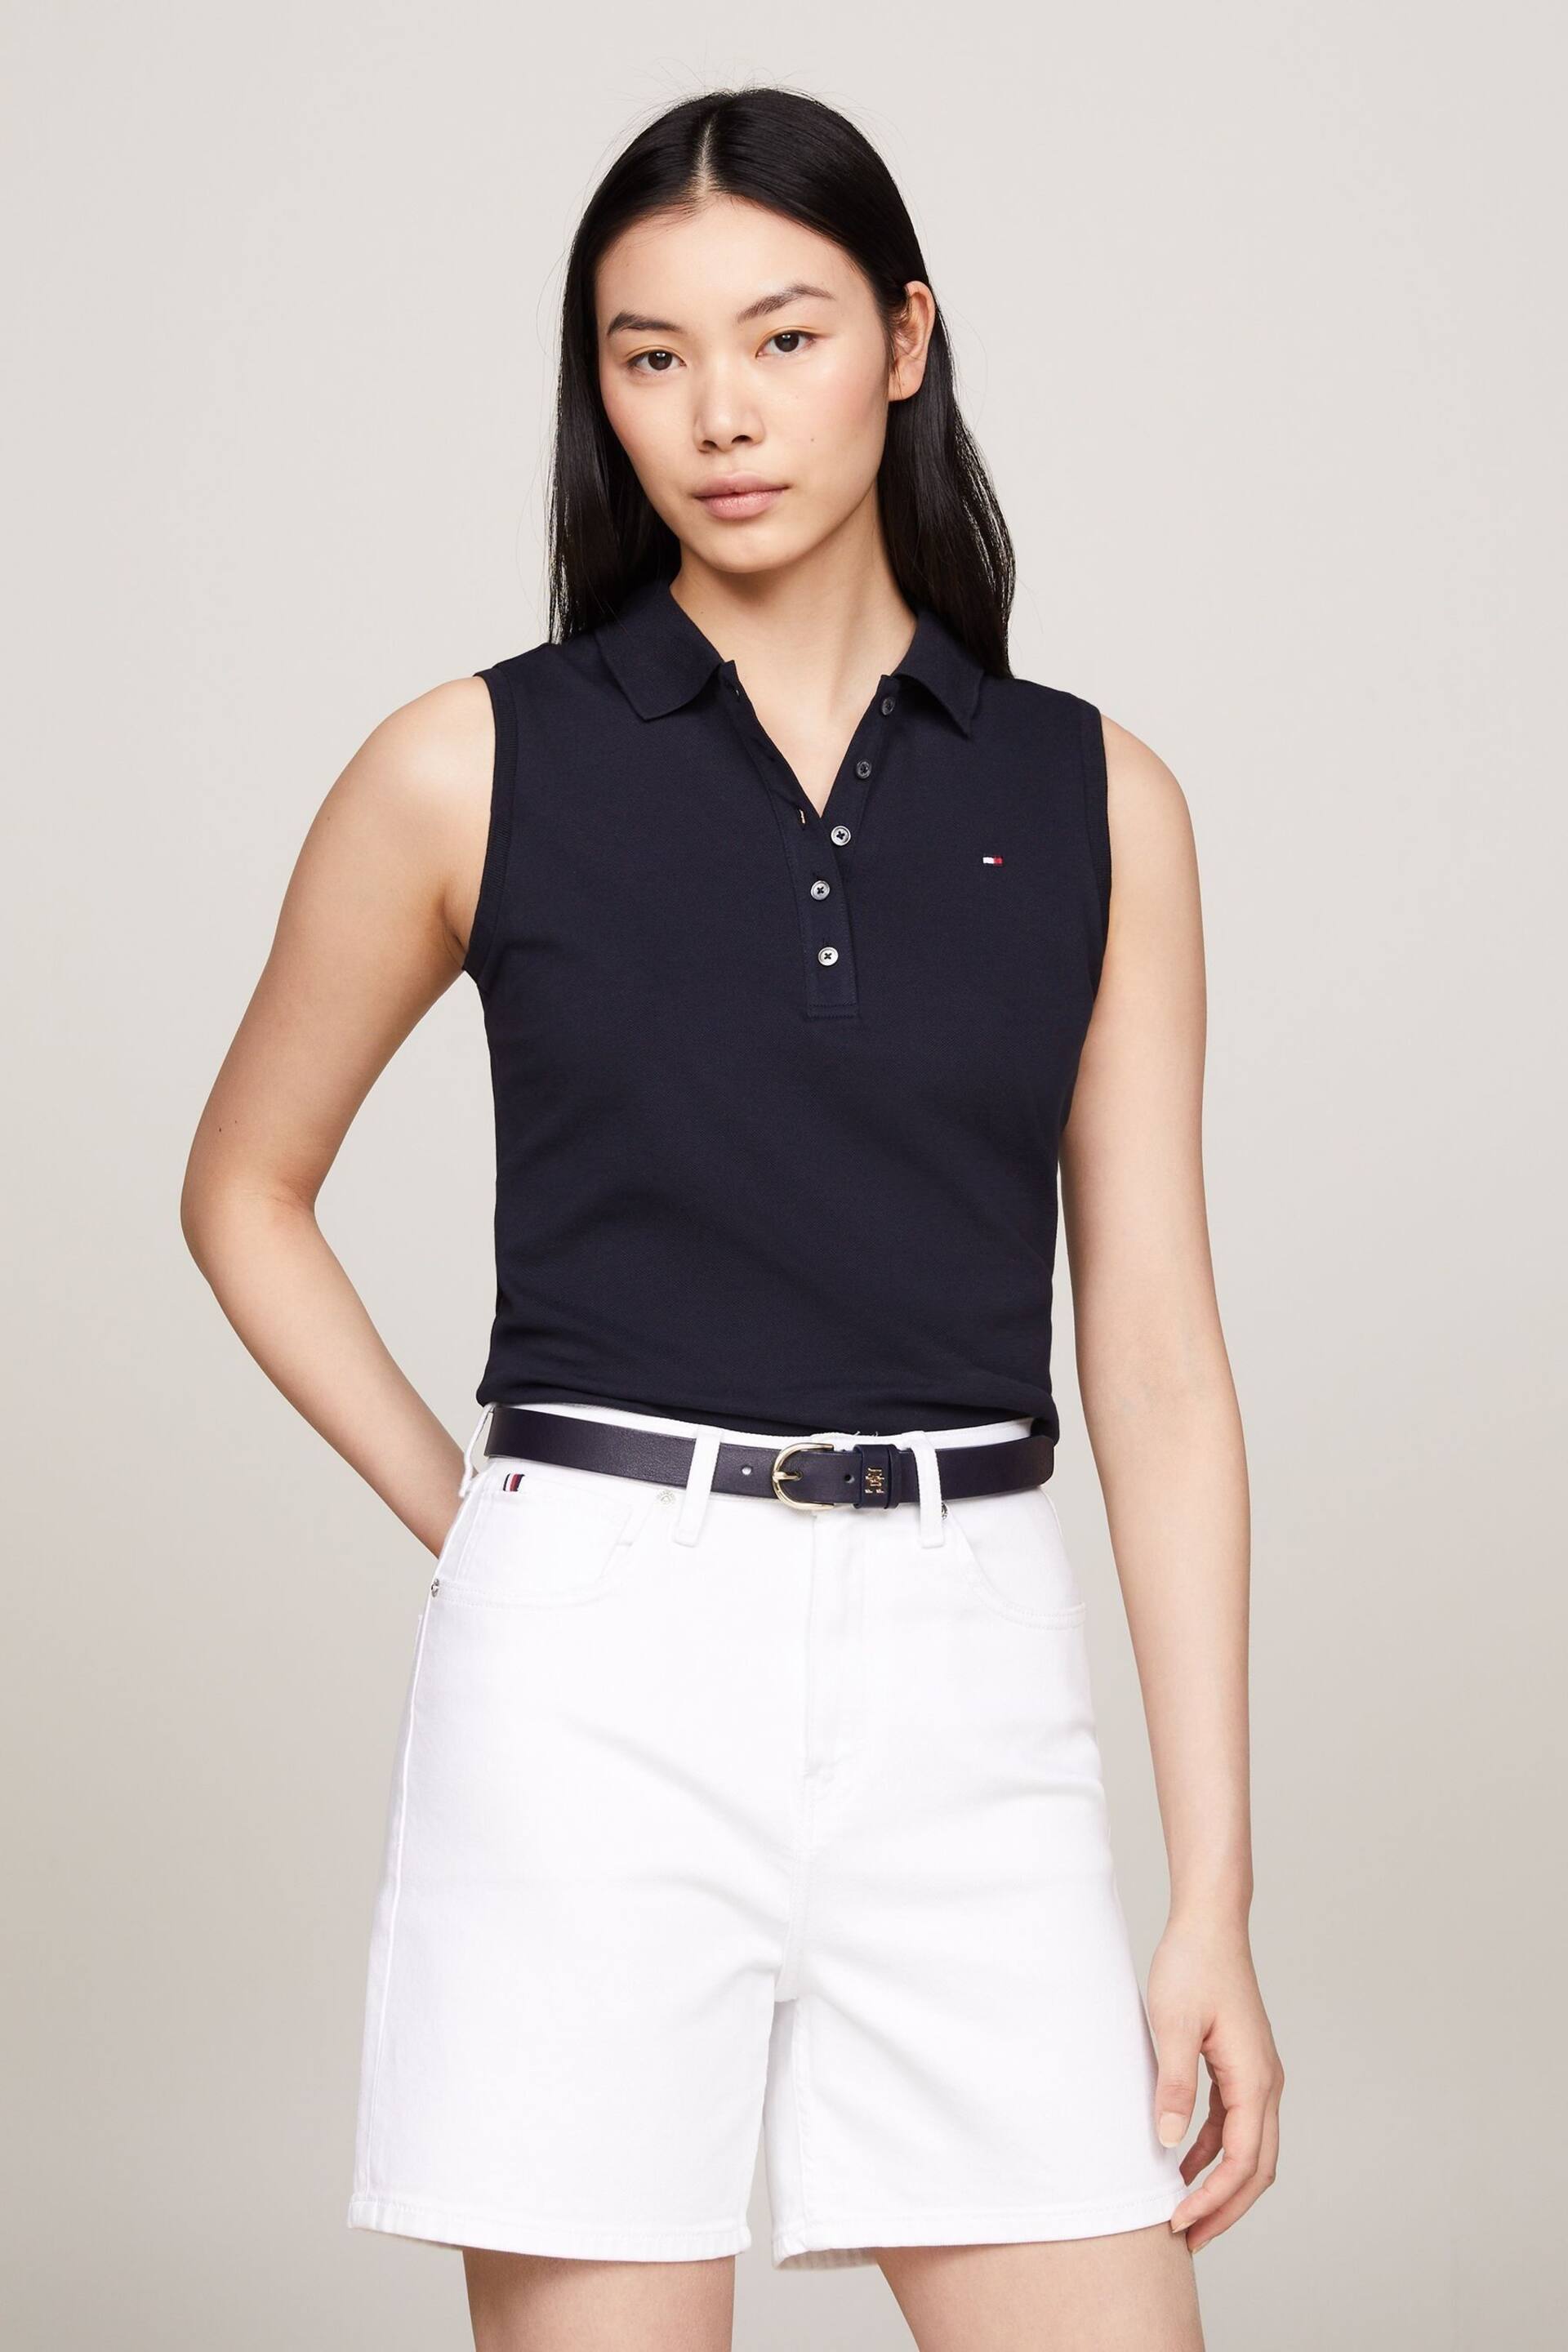 Tommy Hilfiger Blue1985 Sleeveless Polo Top - Image 1 of 5